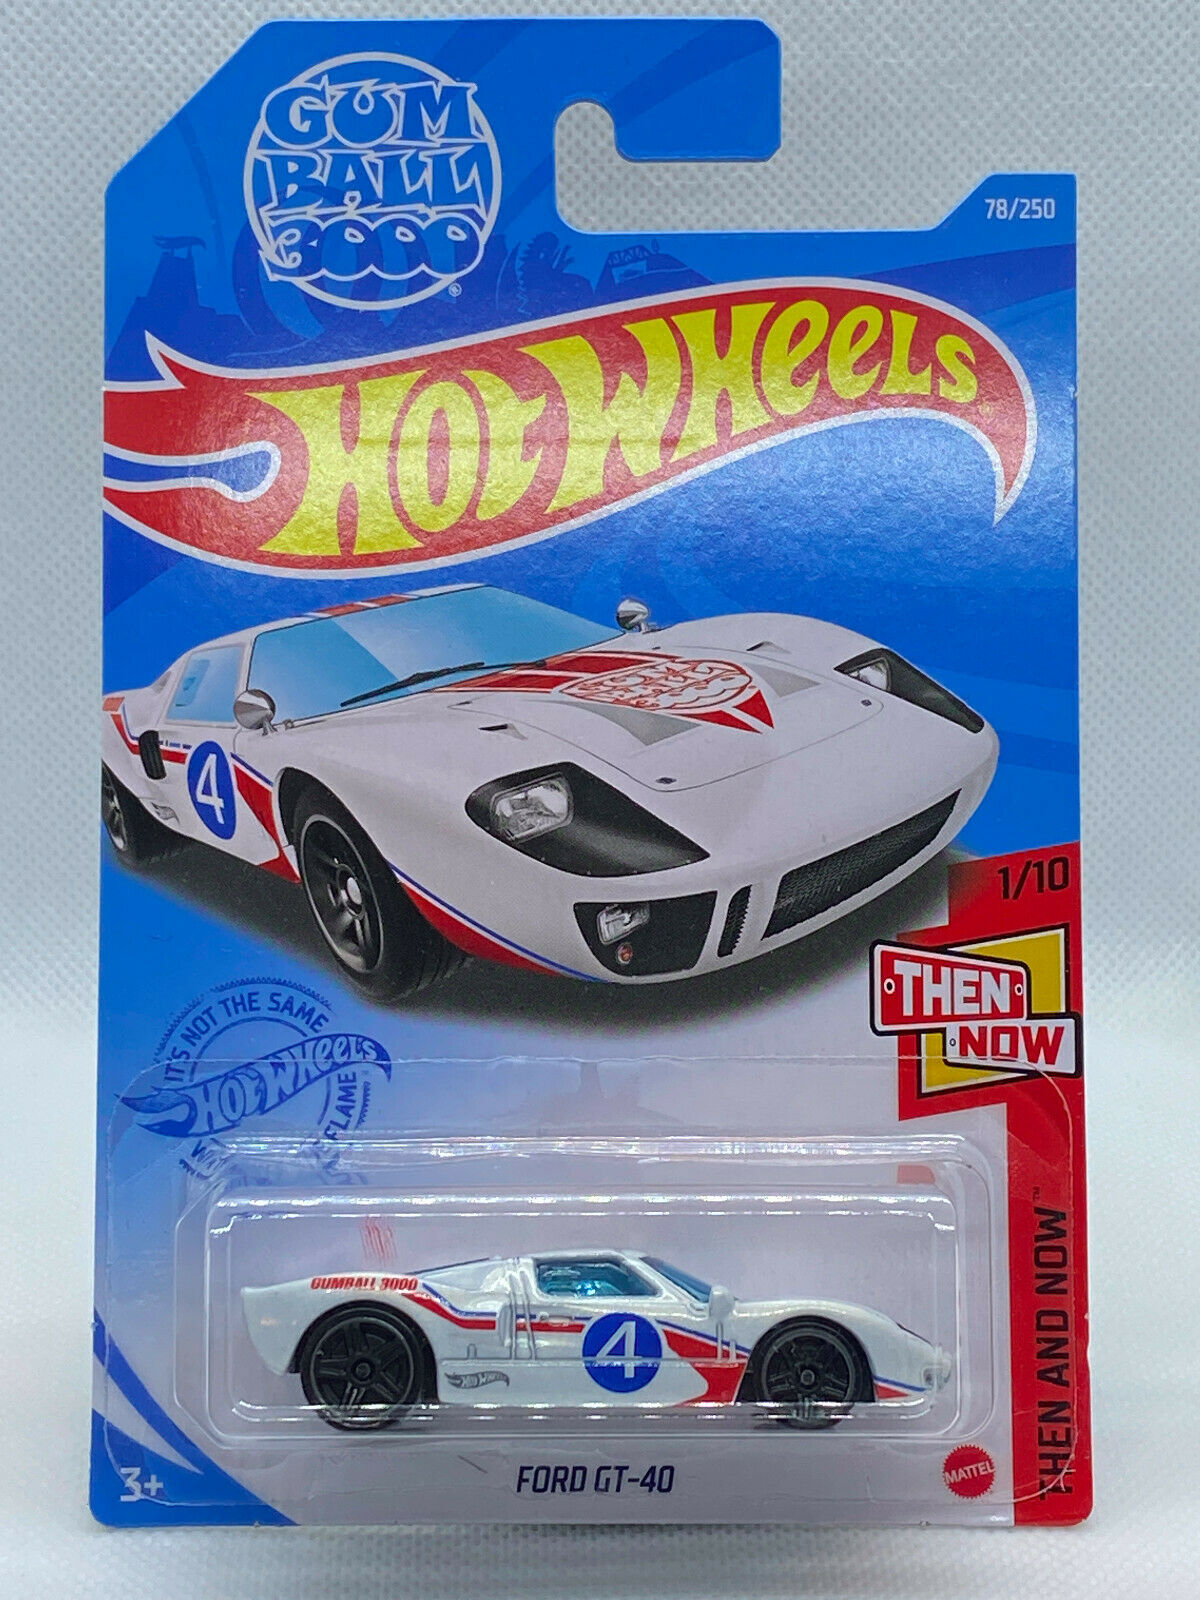 2021 Hot Wheels Then and Now #1/10 Ford GT40 Gumball 3000 #78/250 NIP